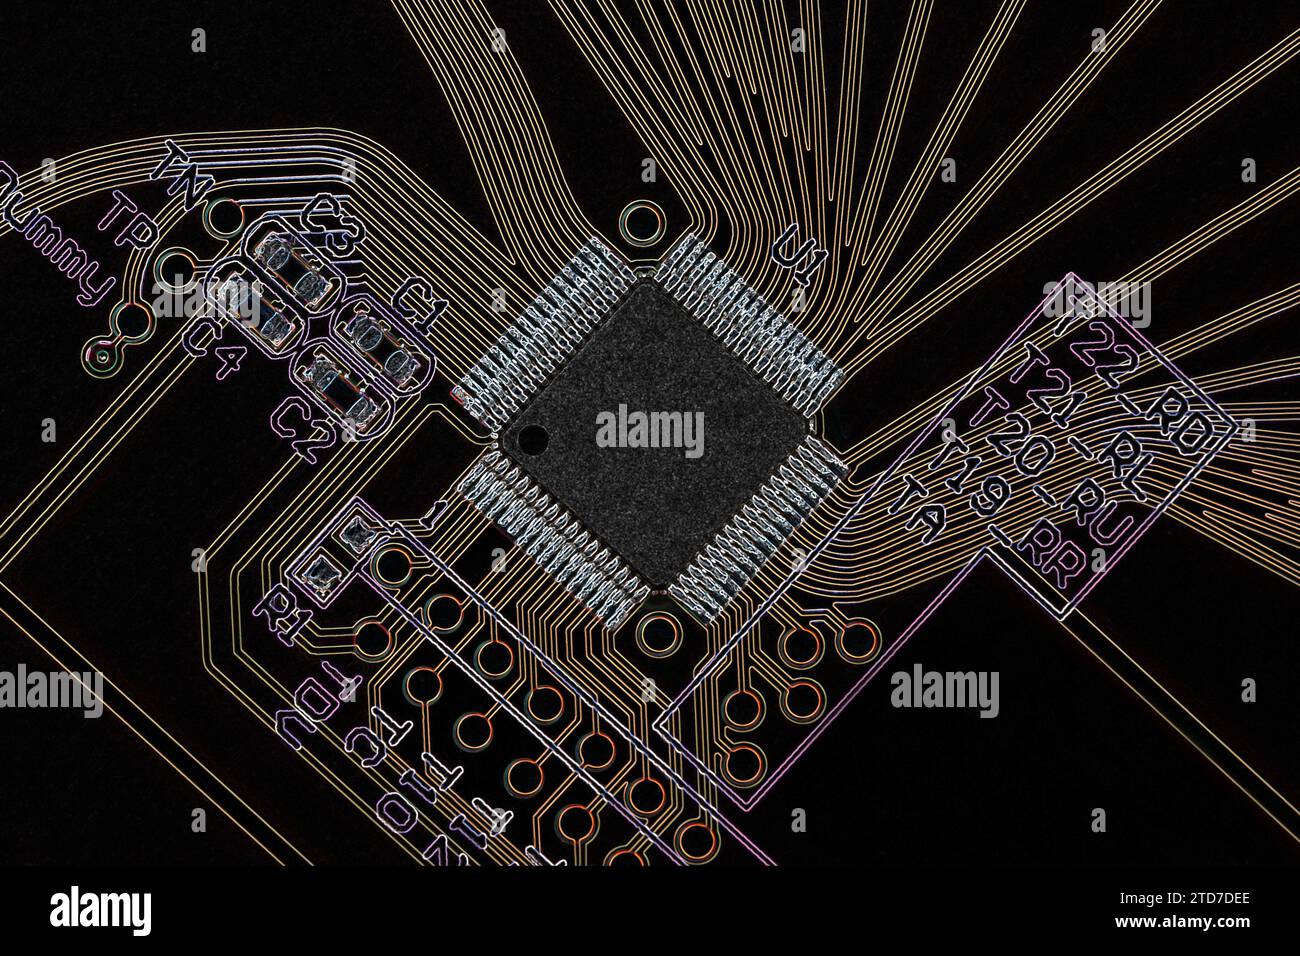 An overhead view of a printed circuit board with a microprocessor, with a negative image effect. Macro photography Stock Photo